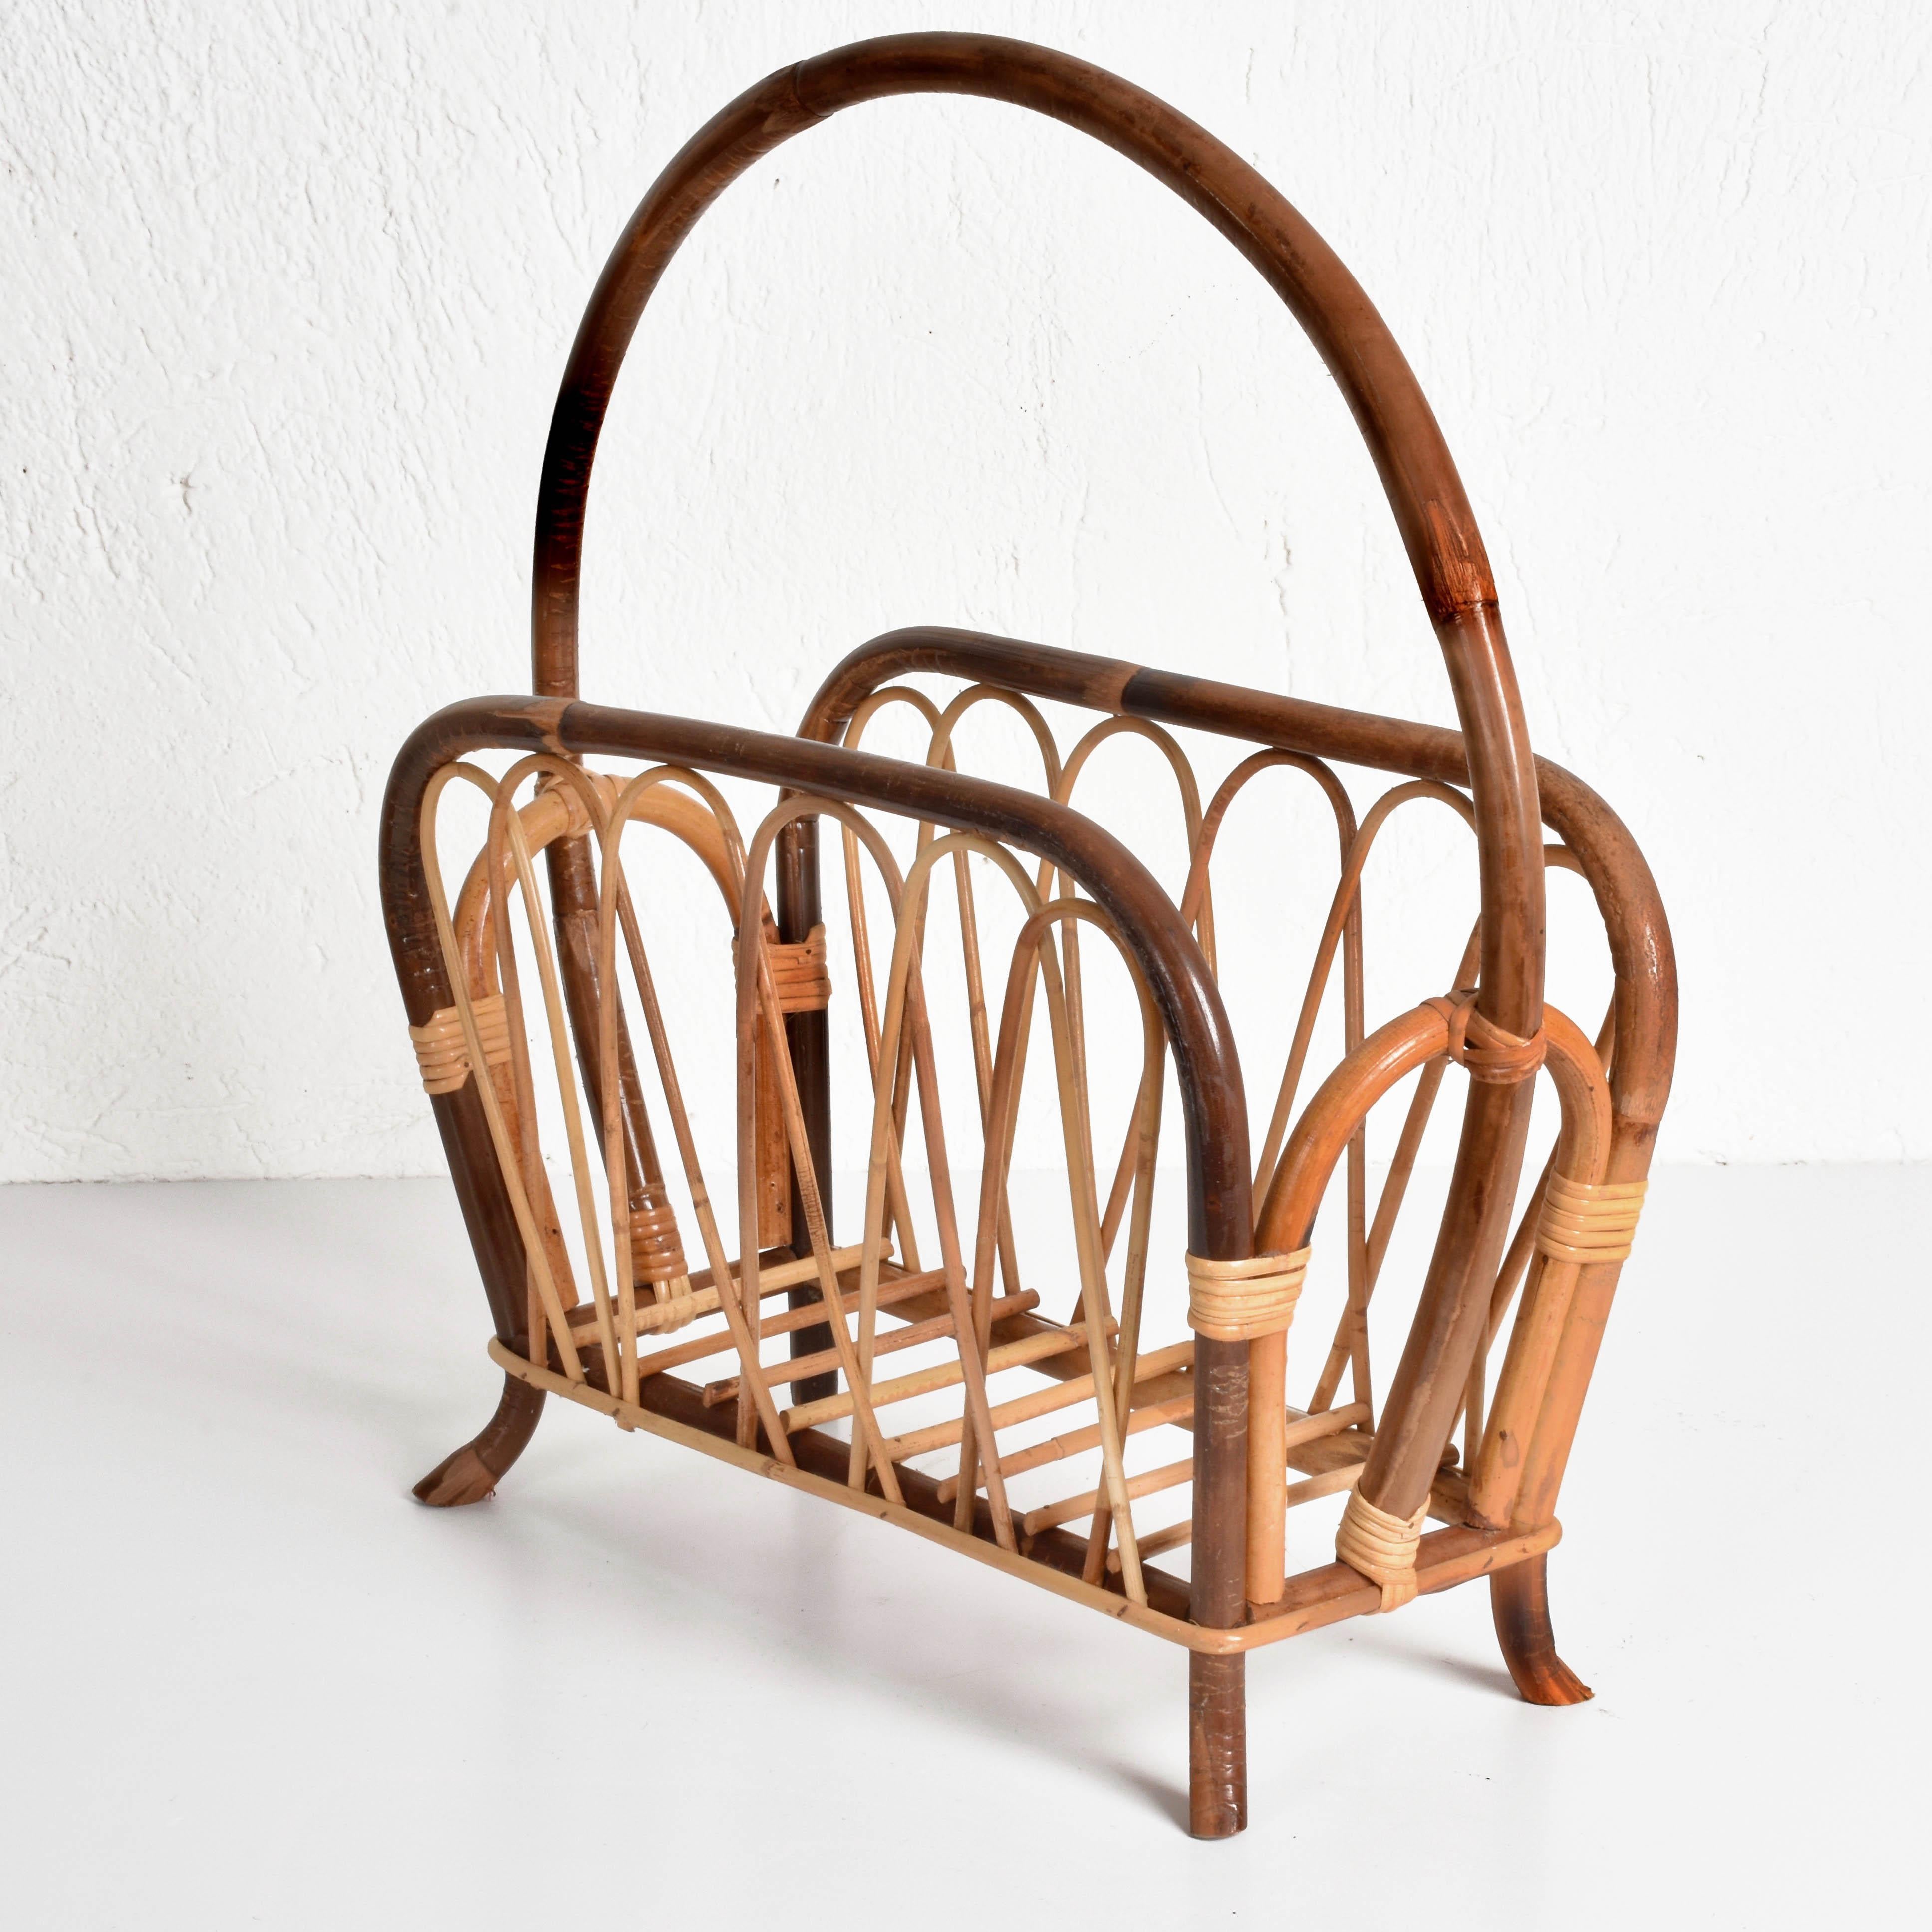 Wonderful midcentury French riviera magazine rack.

It is made of bamboo and rattan with two different shades of brown, it is an Italian production of 1960s.

It is perfect for your entrance hall or for adding charm to your living room.
 